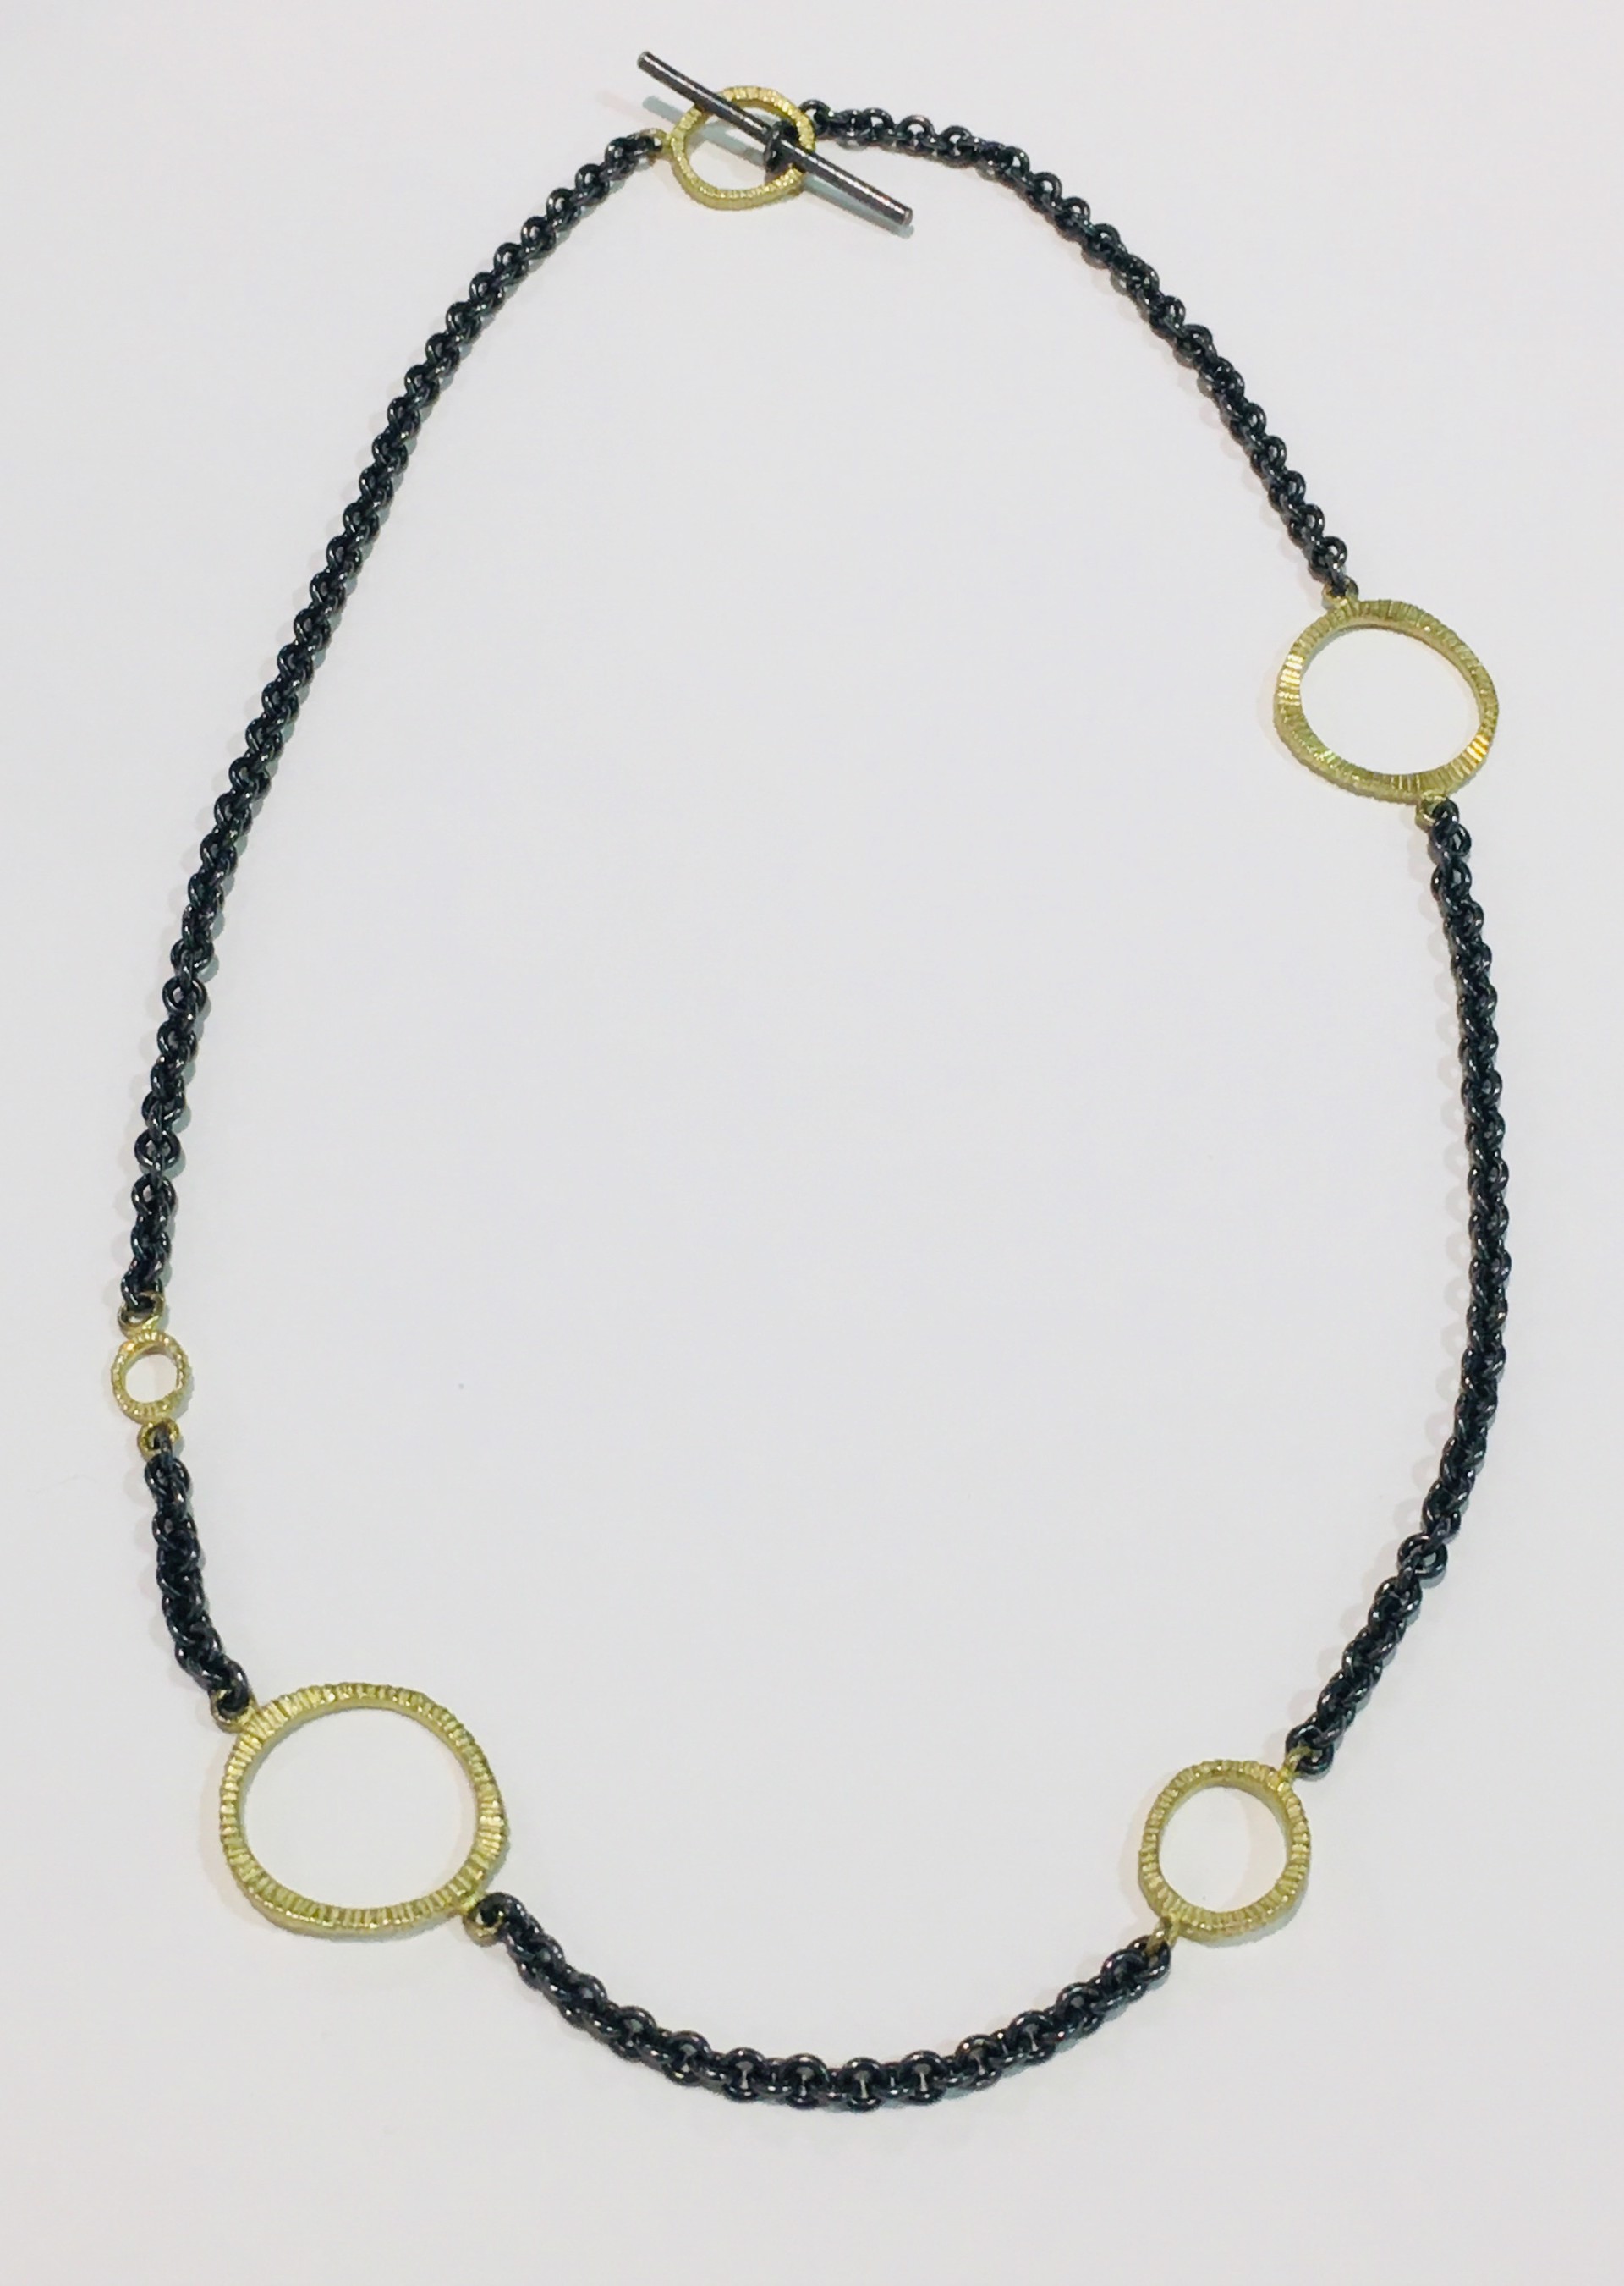 Gold and Silver Necklace by DAHLIA KANNER